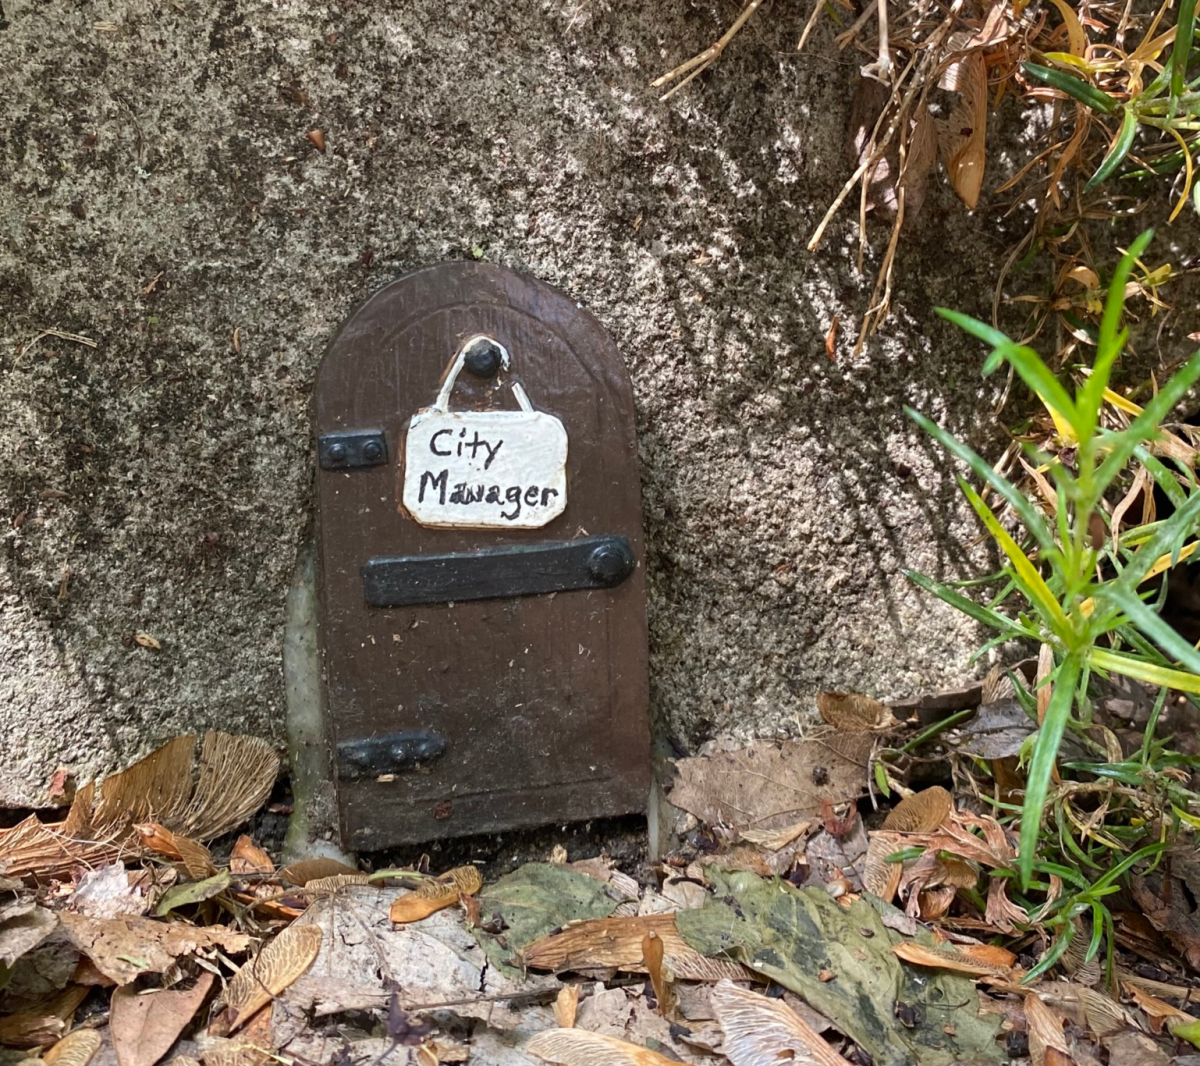 Image is of a small, brown fairy door that say's "City Manager" on it.